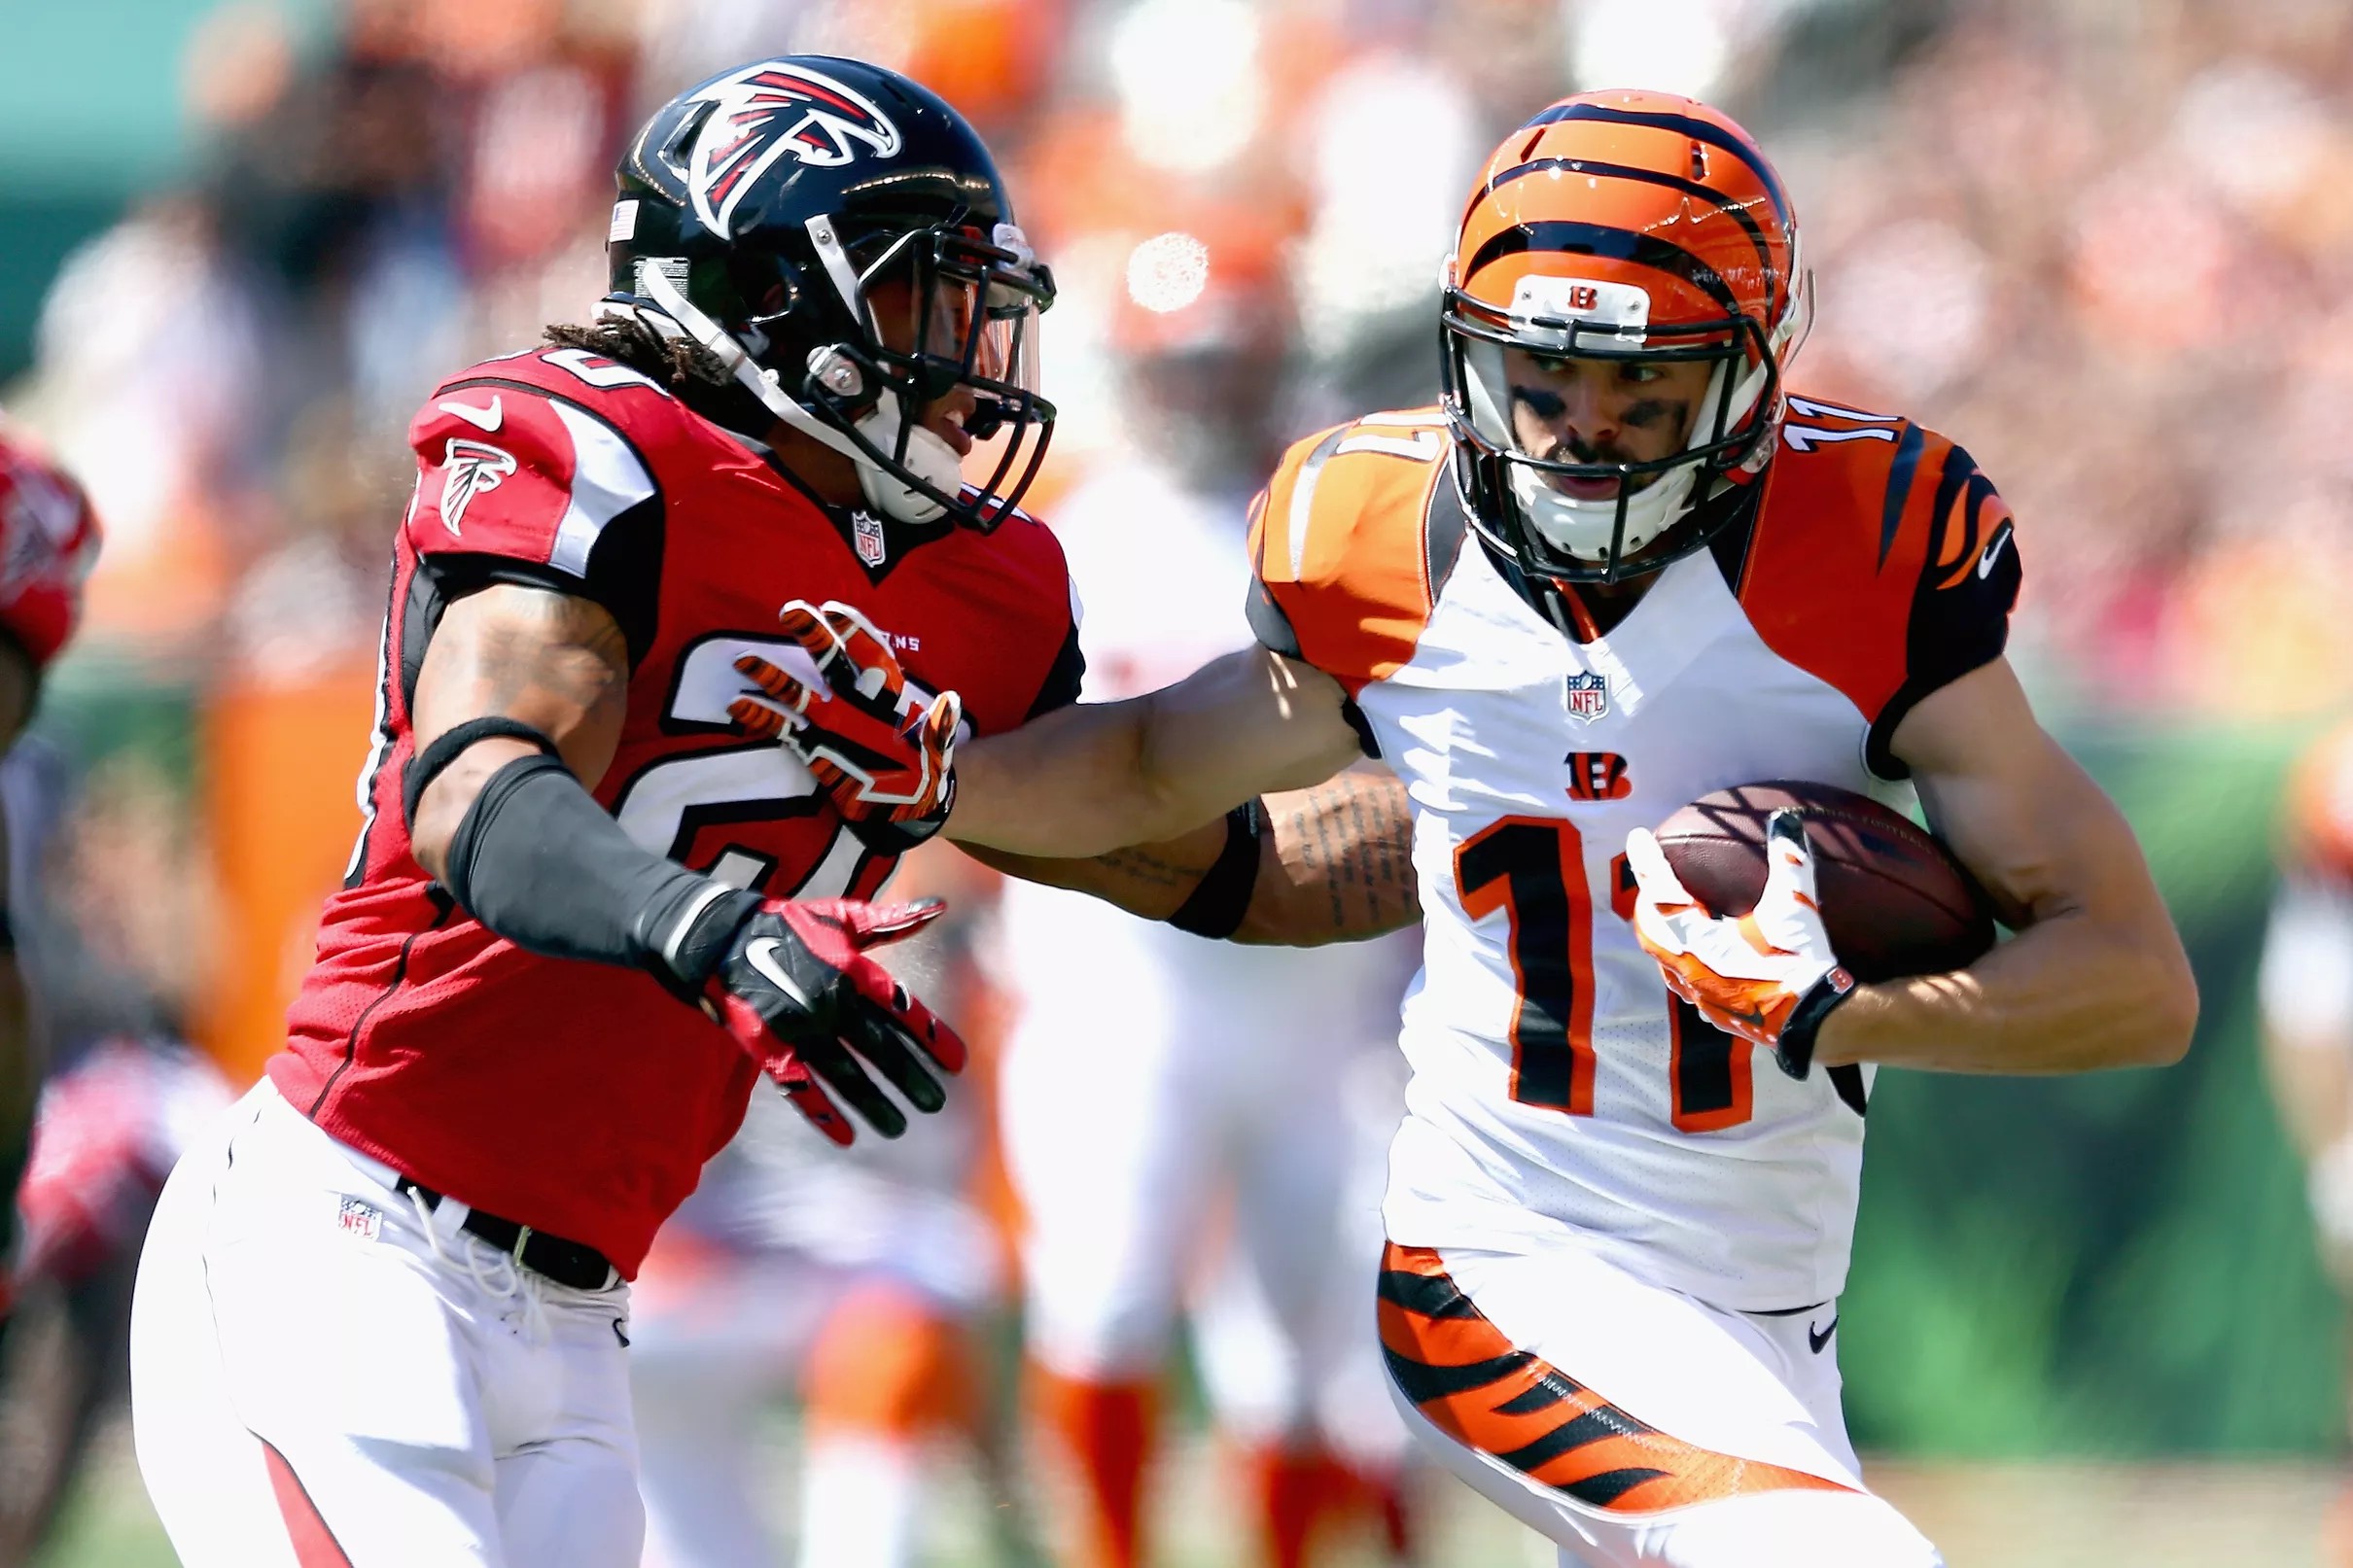 Falcons defense vs. Bengals offense Which side wins?